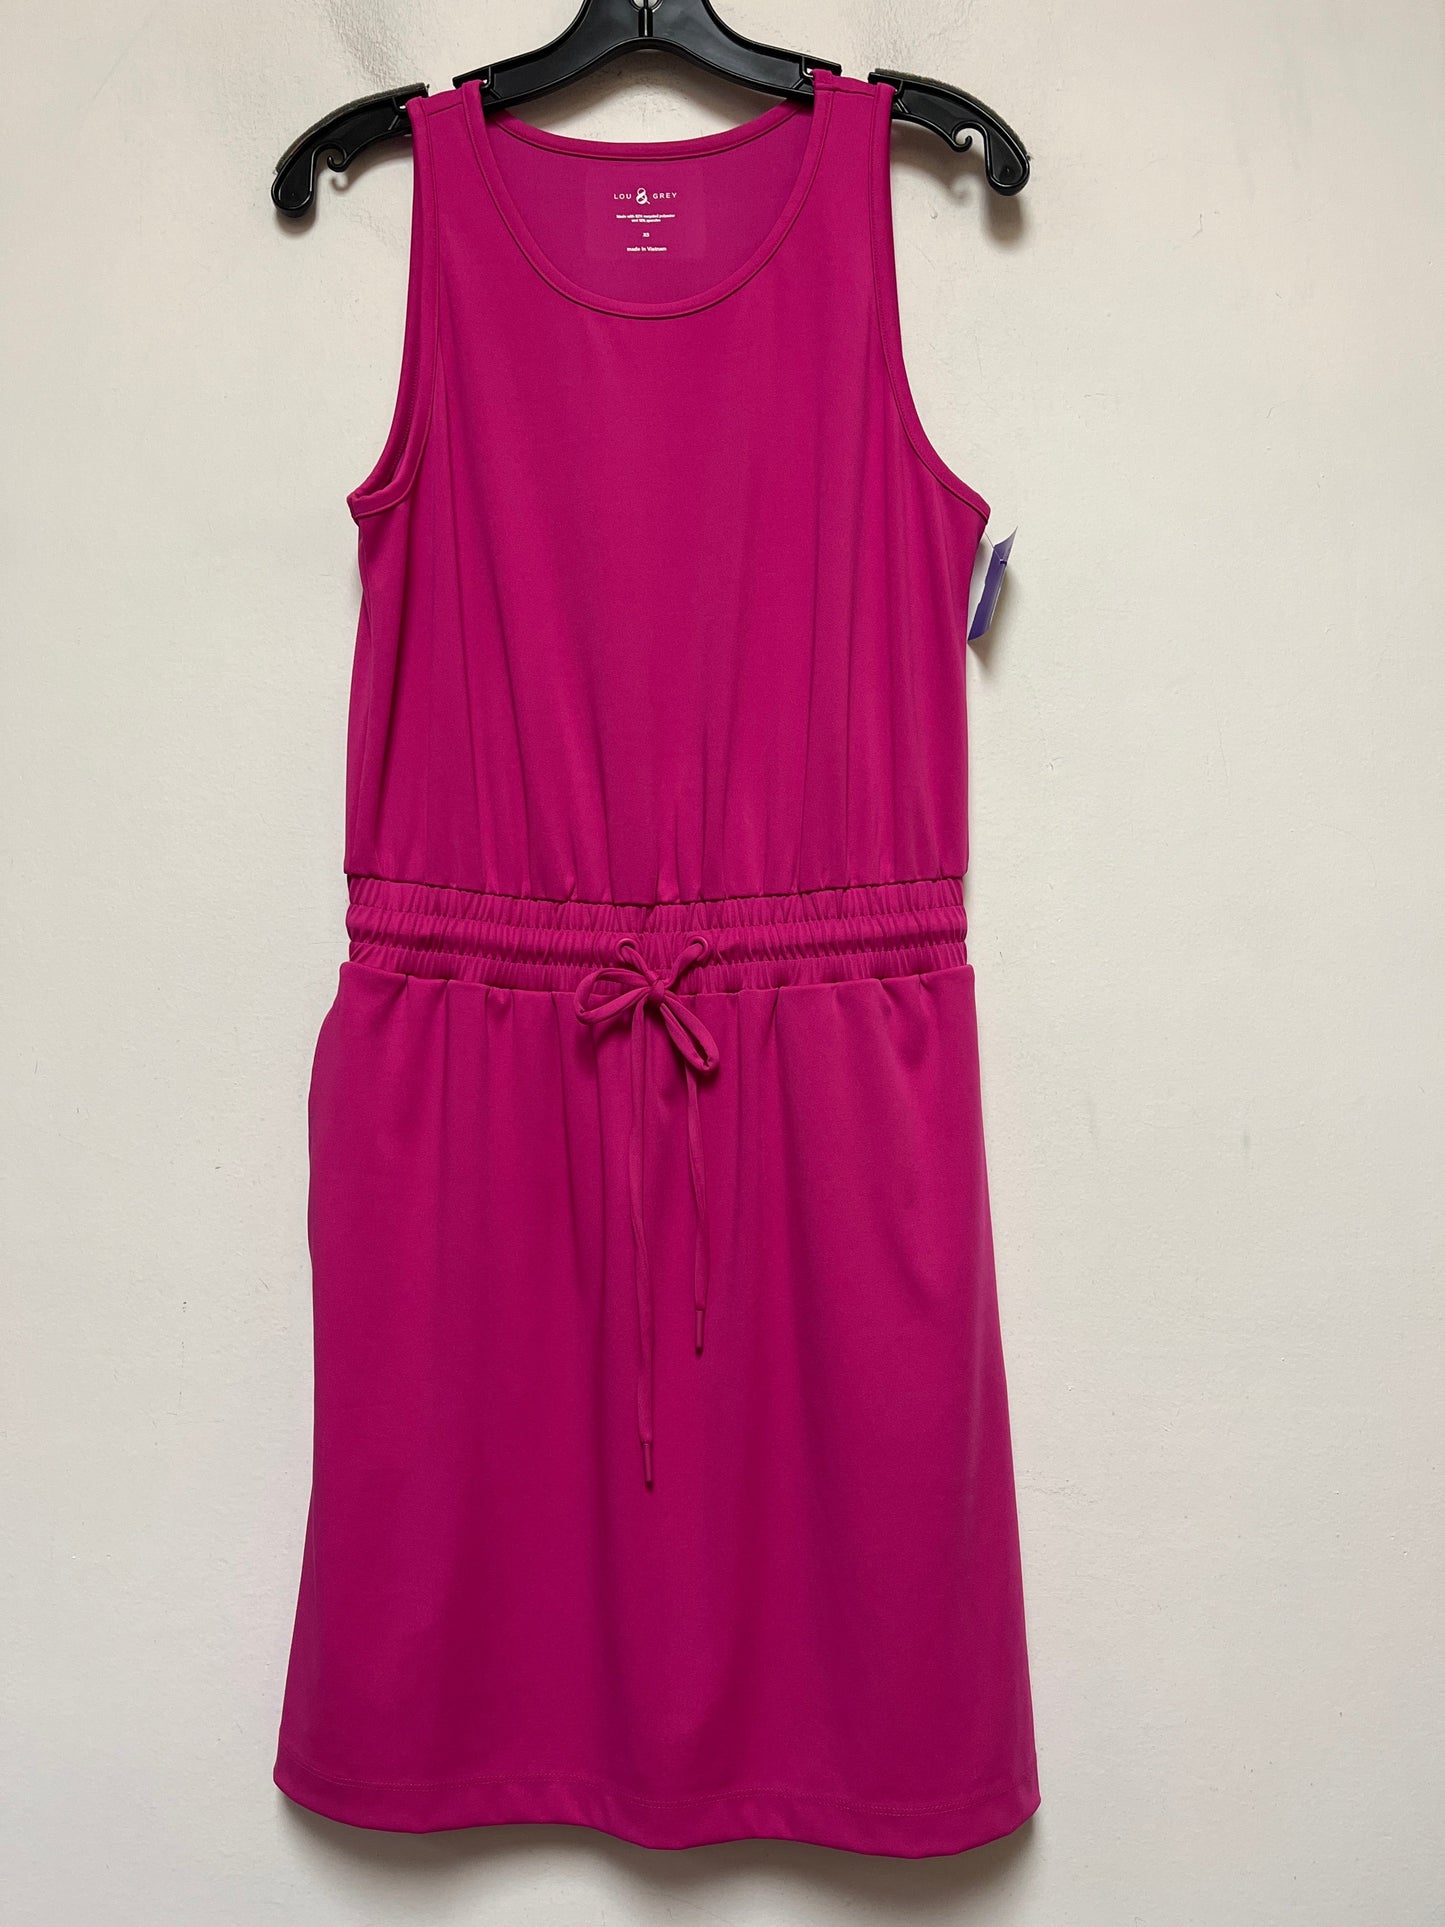 Pink Dress Casual Short Lou And Grey, Size Xs